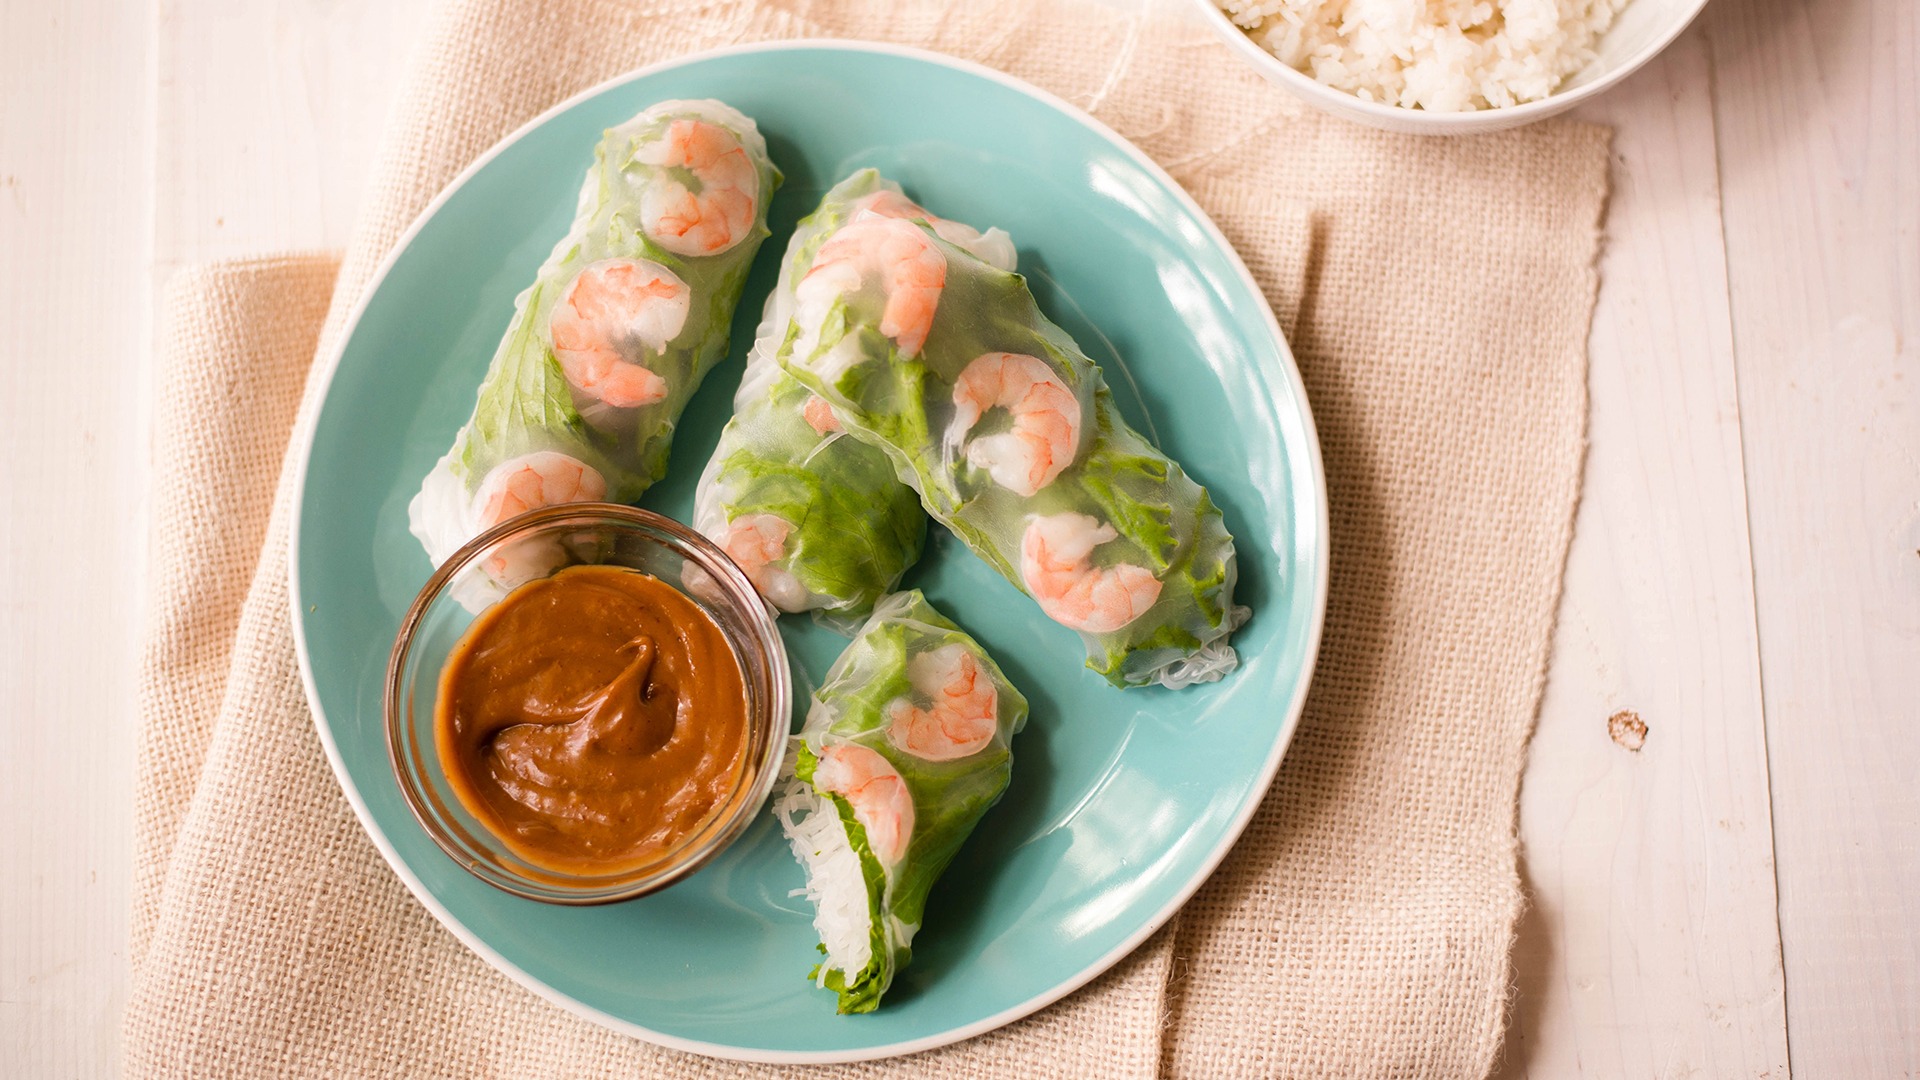 Shrimp Egg Rolls with Spicy Peanut Dipping Sauce - Life's Ambrosia